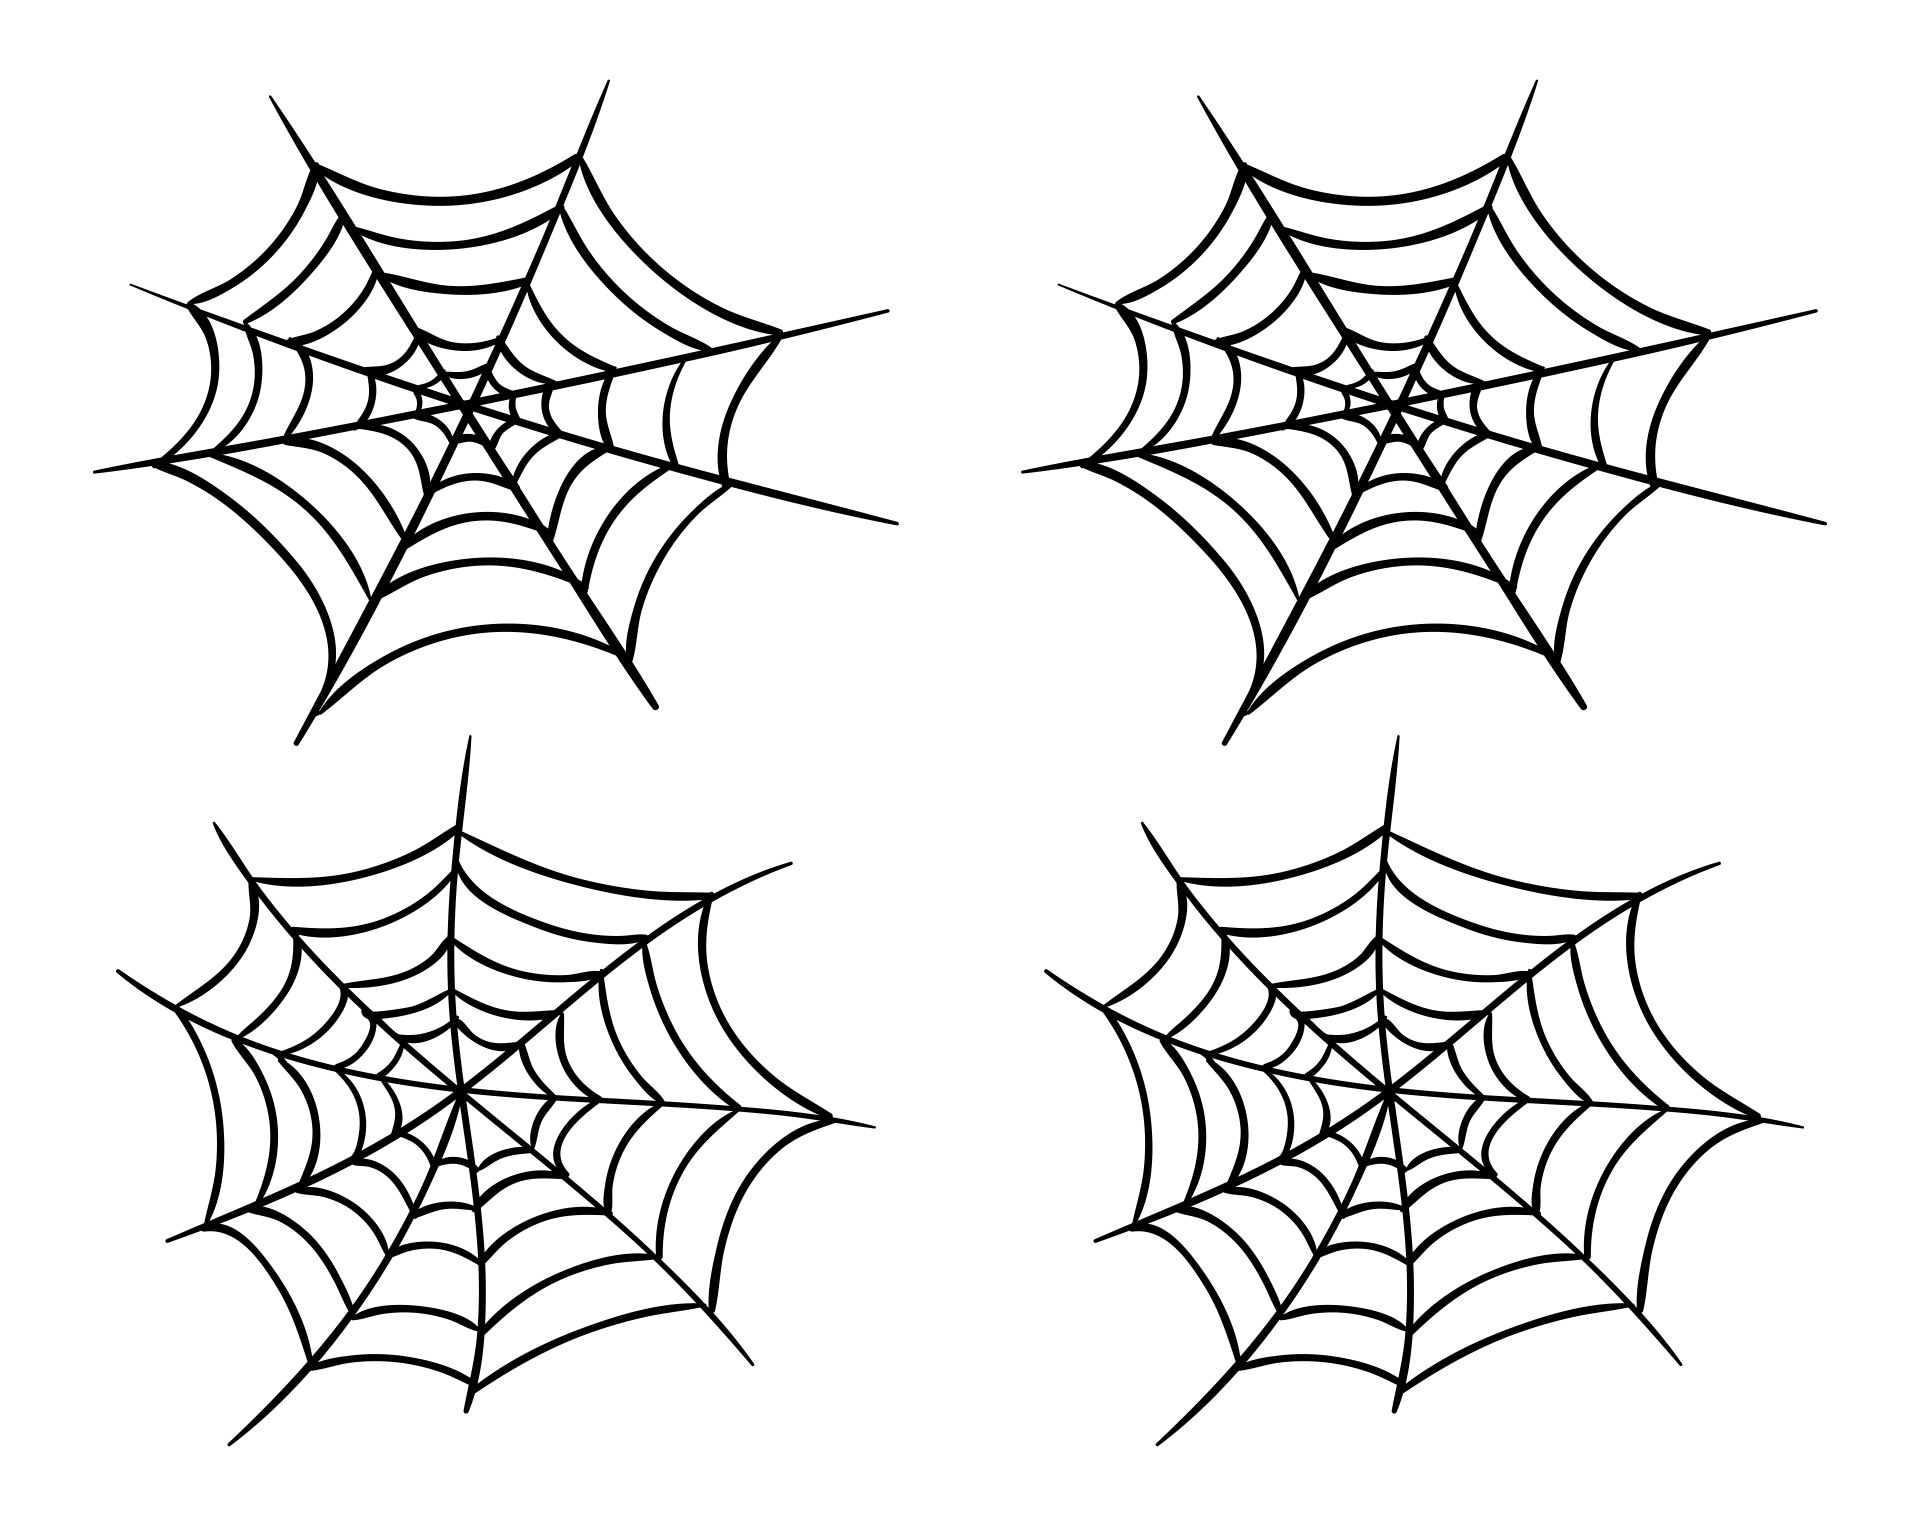 new-coloring-pages-spider-web-colouring-pages-spider-coloring-pages